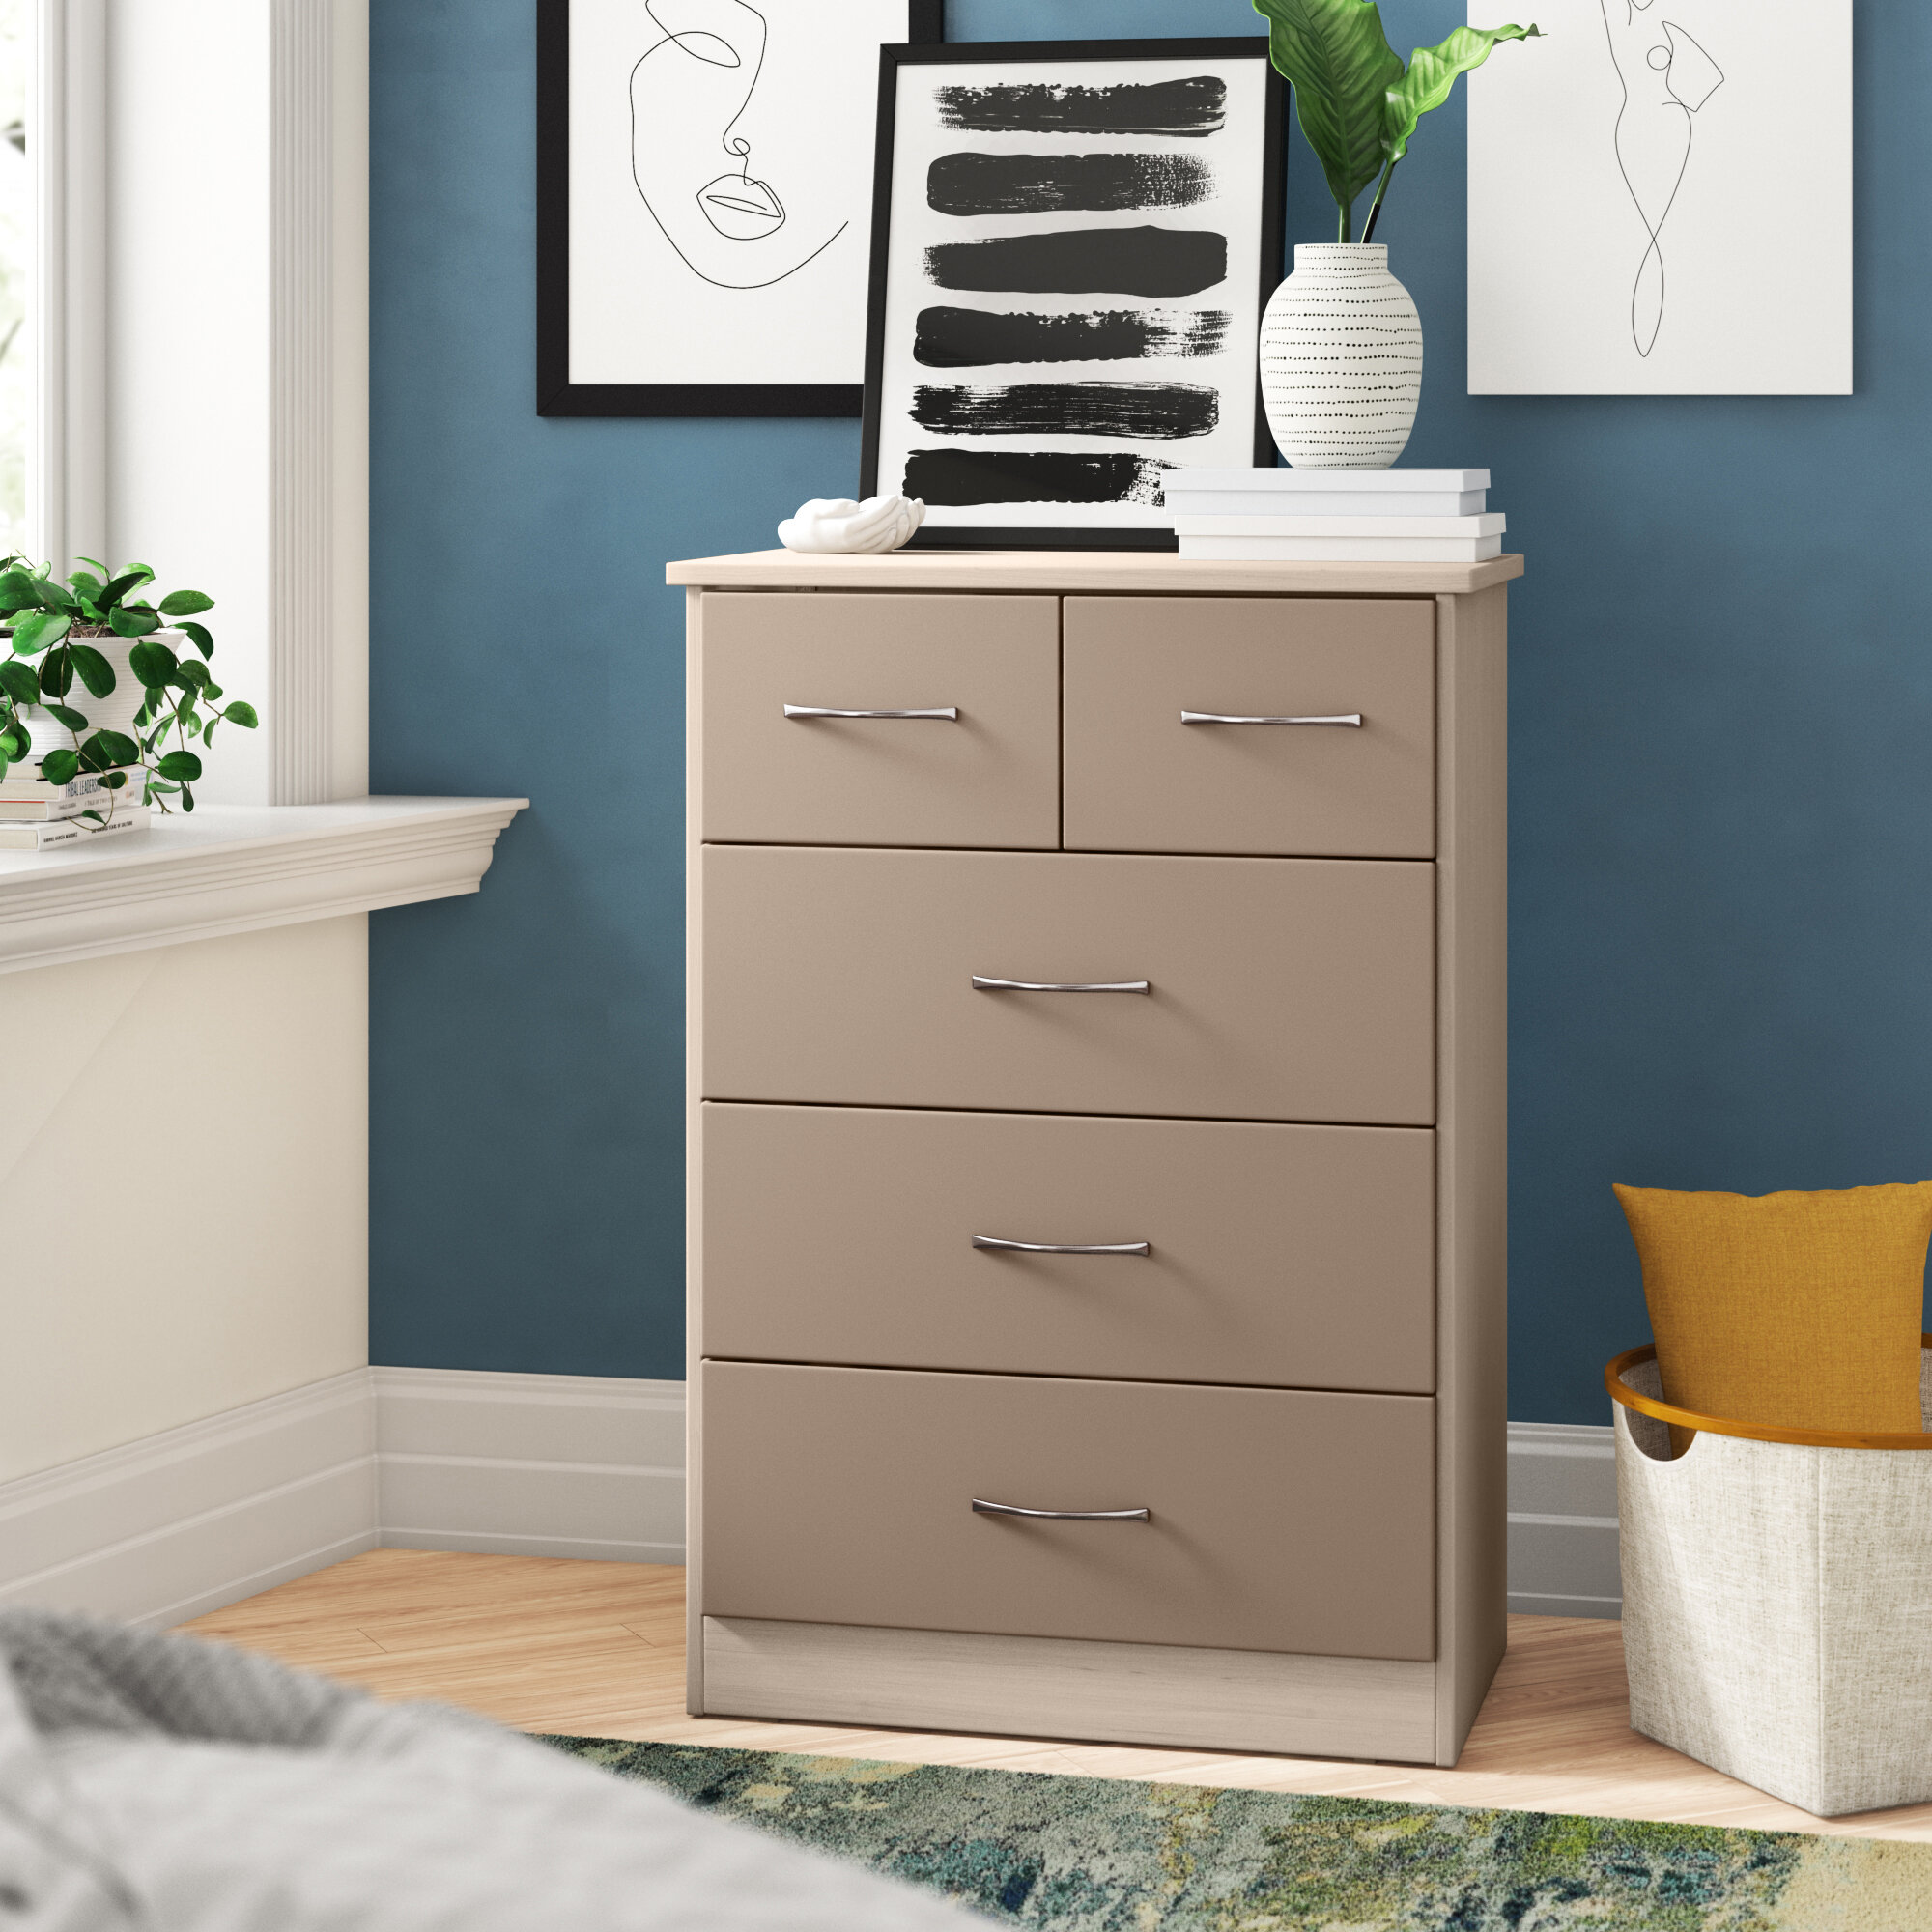 Beige Chest Of Drawers You Ll Love Wayfair Co Uk